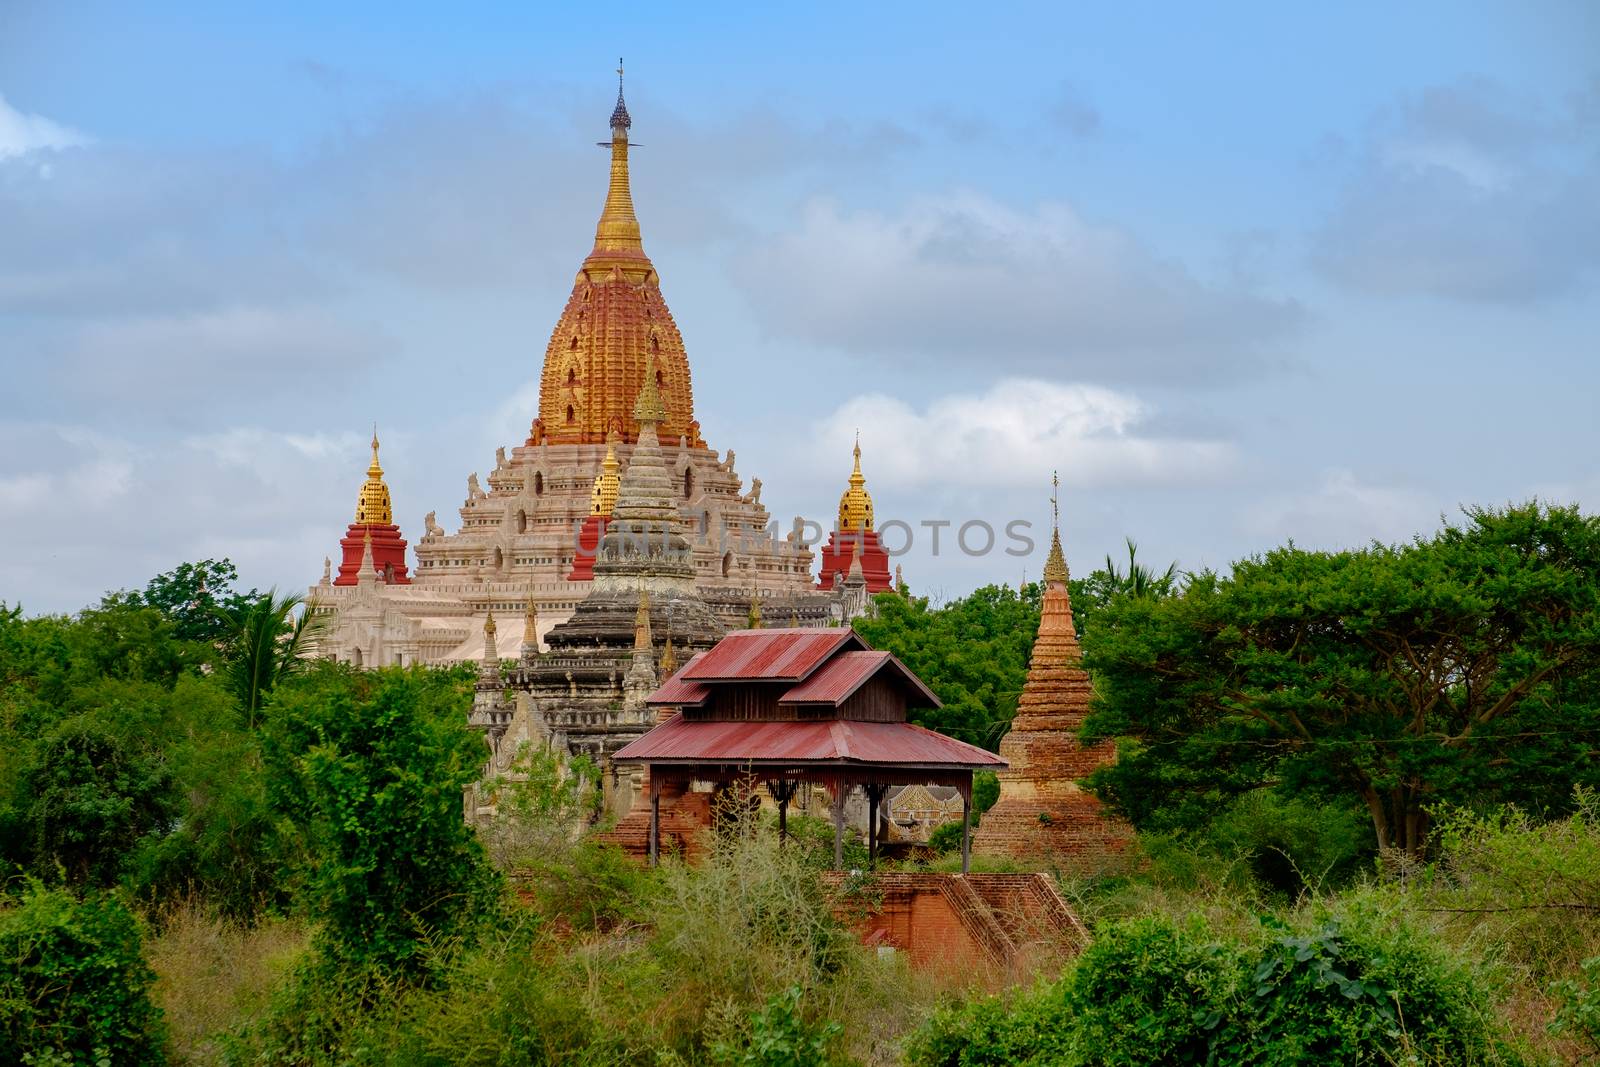 Scenic view of Ananda temple in old Bagan area, Myanmar by martinm303